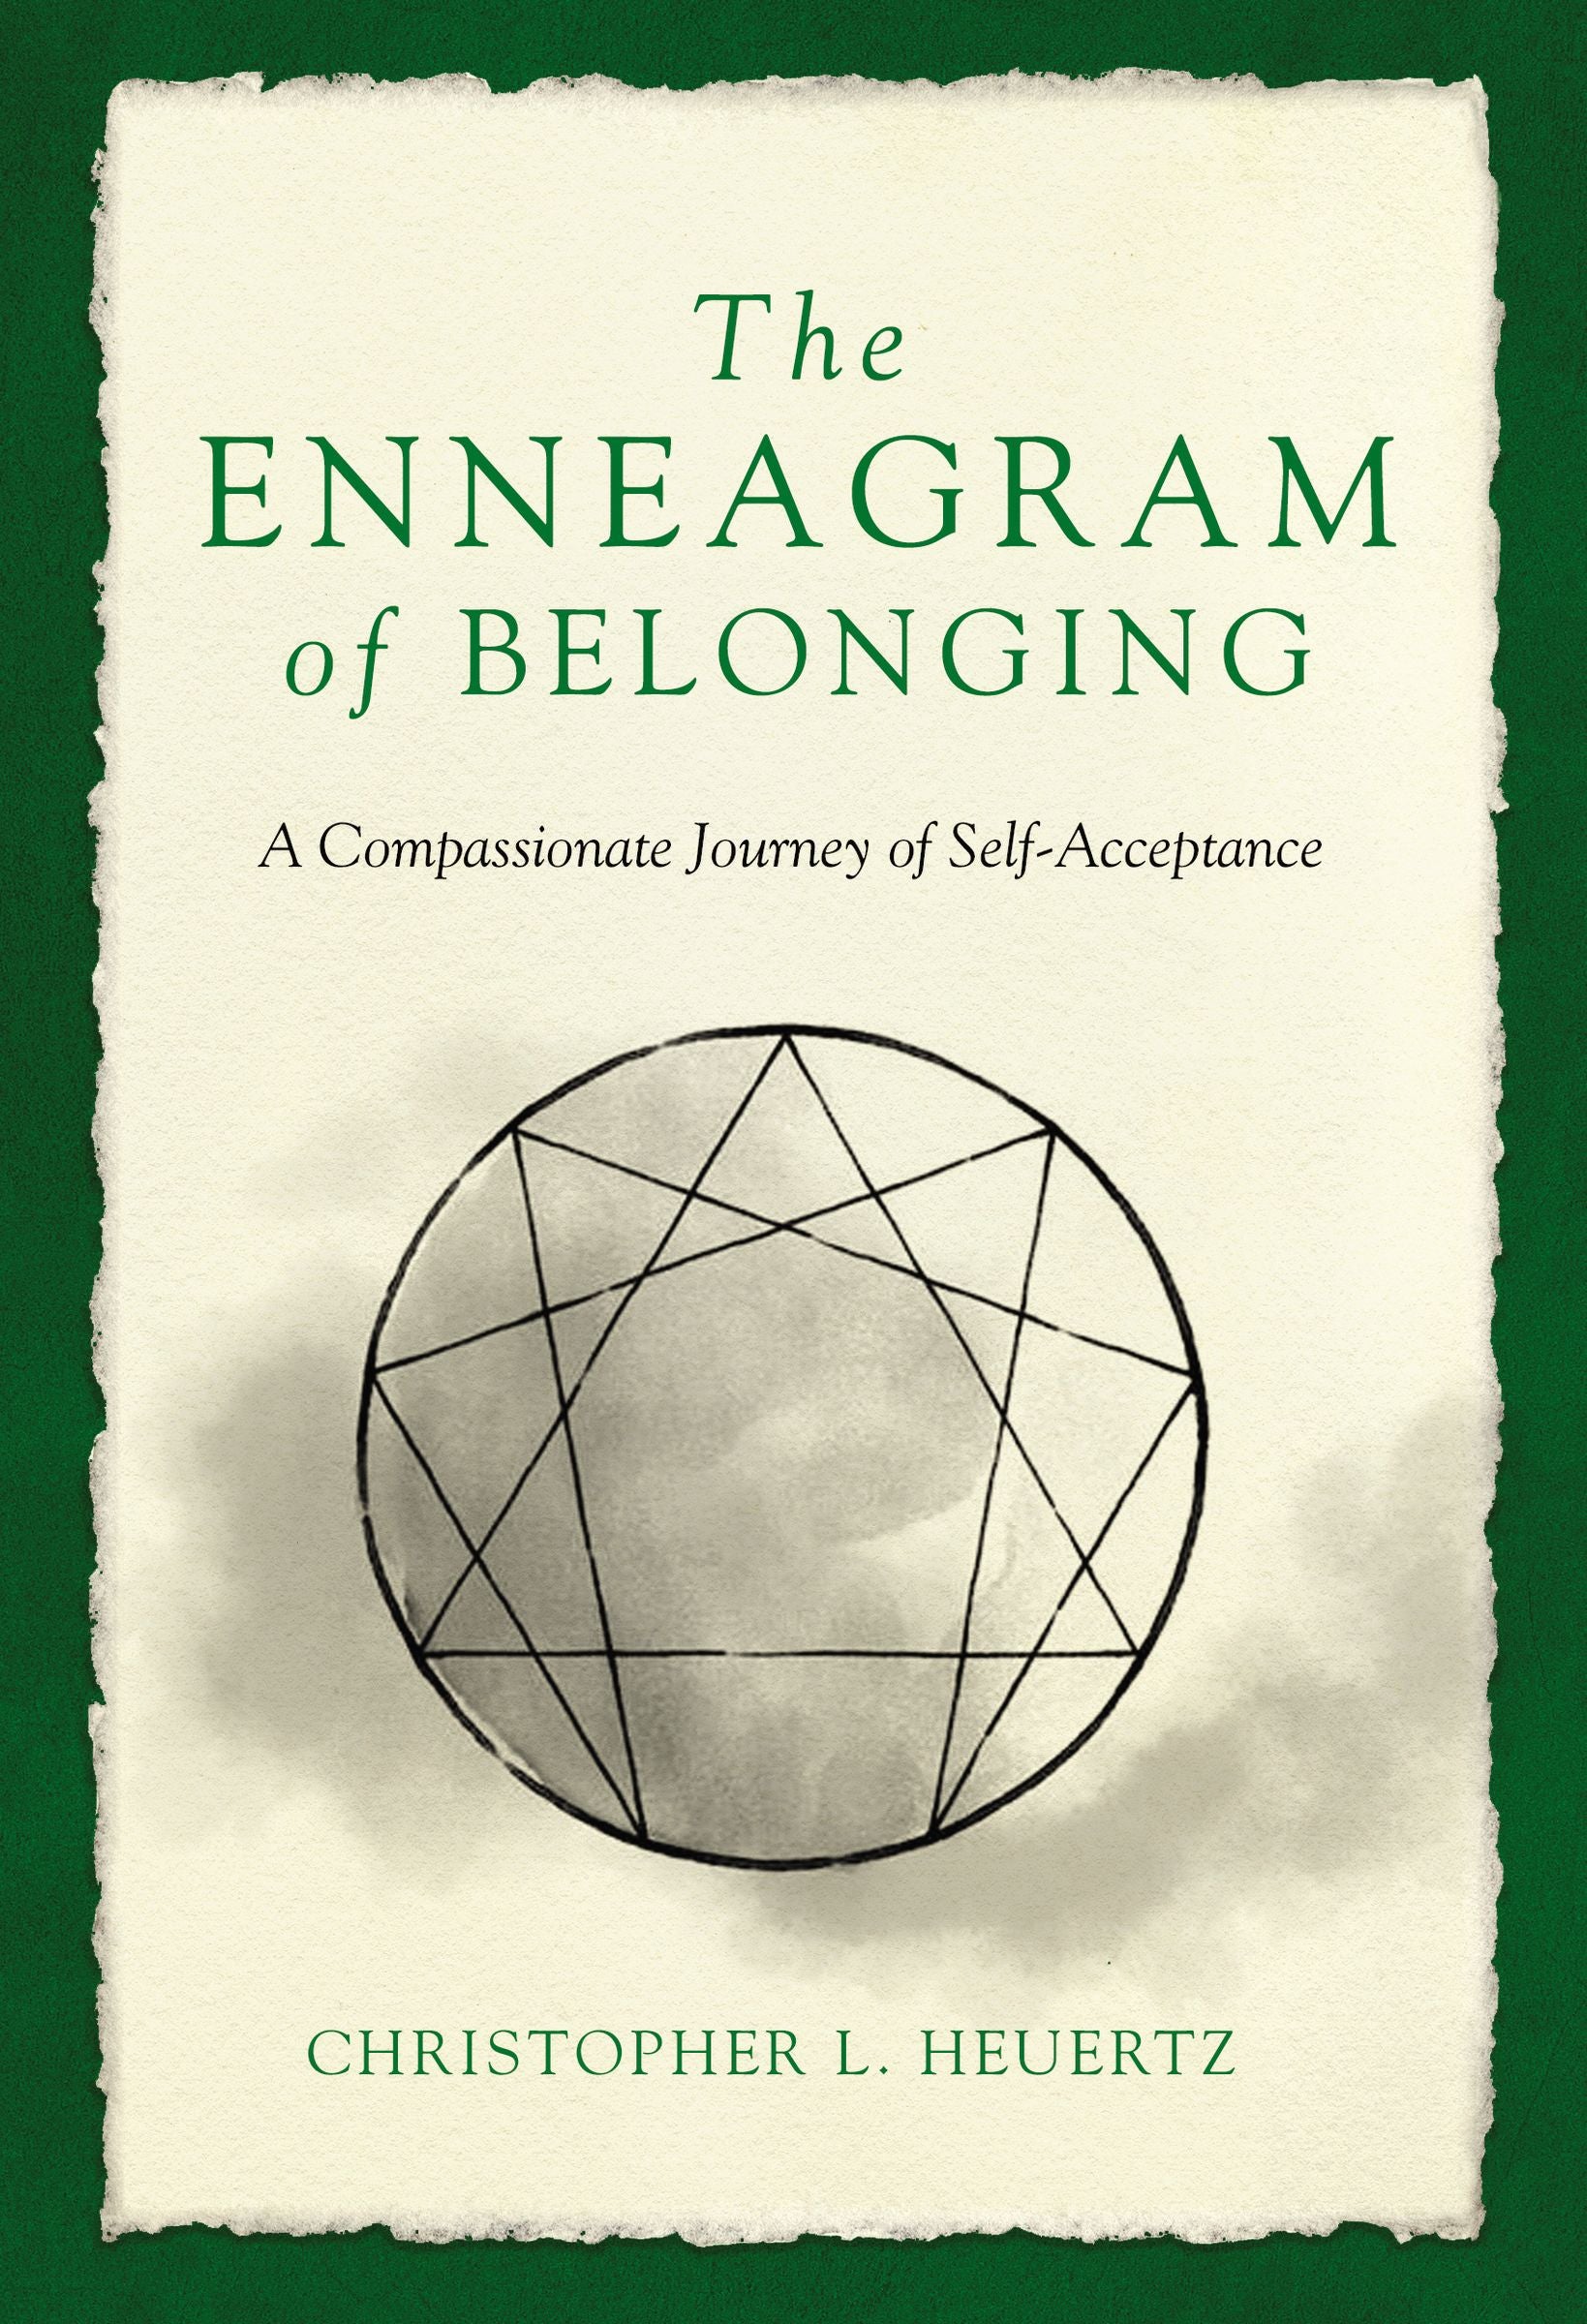 Image of The Enneagram of Belonging other